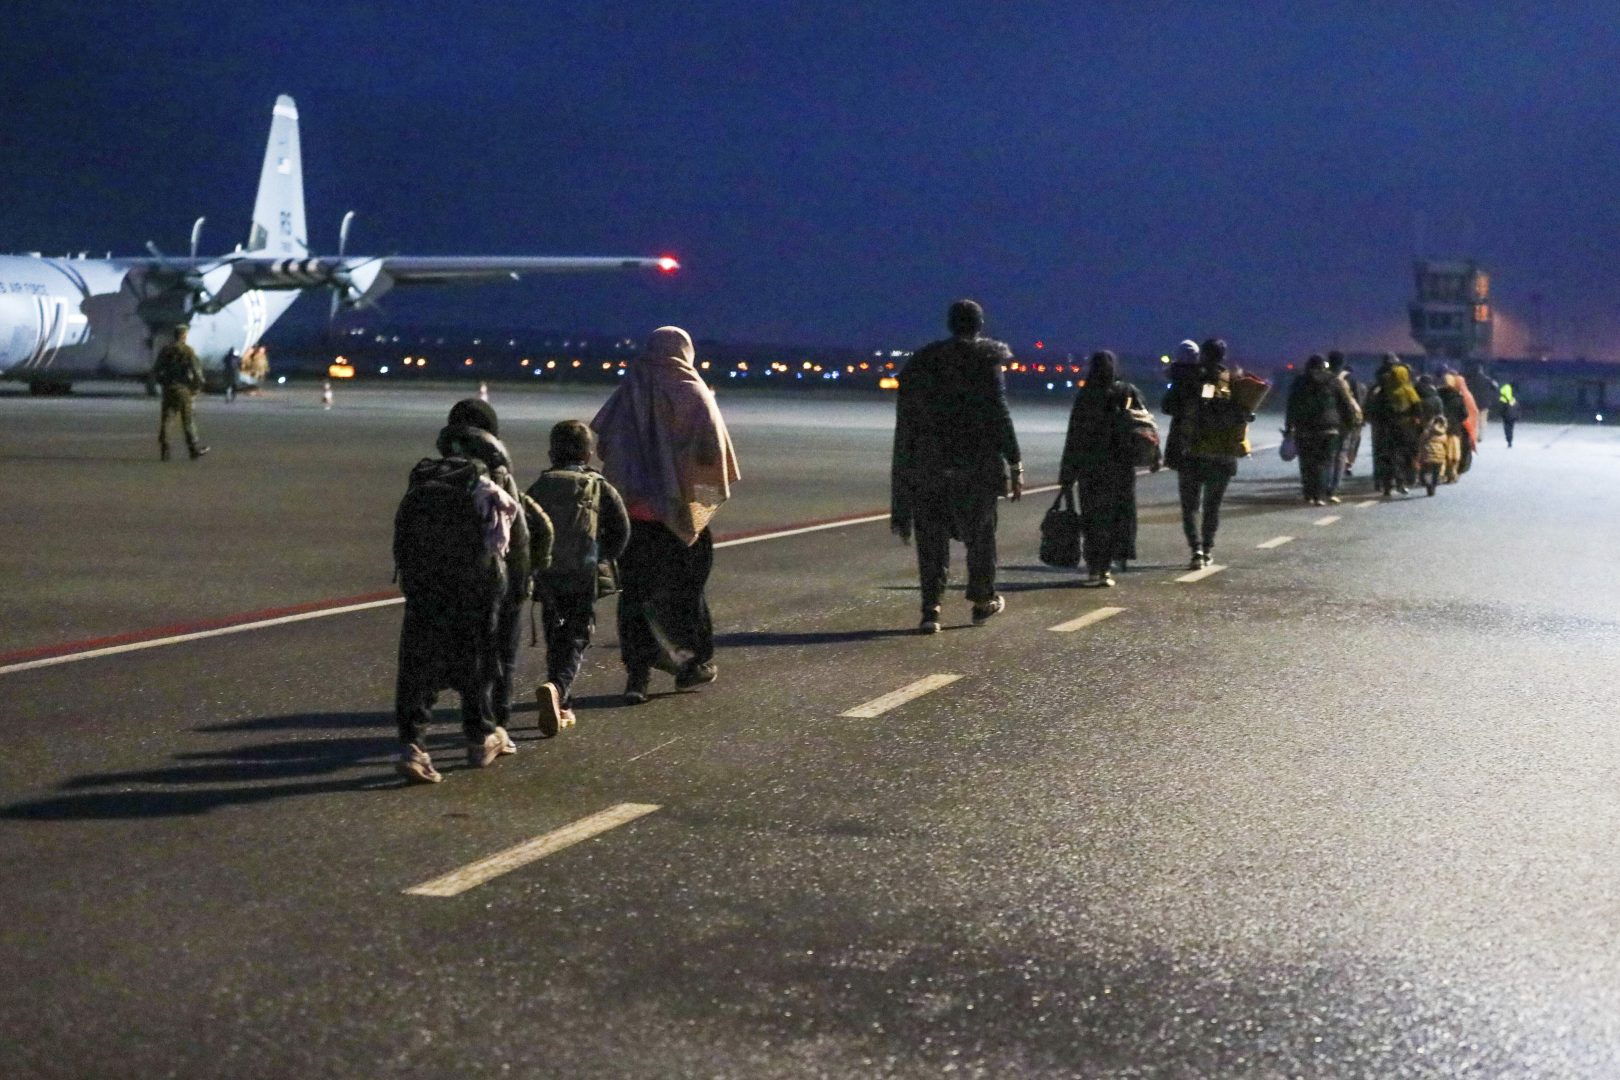 In this image provided by the U.S. Army U.S.-affiliated Afghans depart Pristina International Airport in Pristina, Kosovo on Oct. 16, 2021. During their temporary stay at Camp Liya, Afghan families receive housing, medical, and logistical support from Task Force Ever Vigilant. The U.S. is welcoming tens of thousands of Afghans airlifted out of Kabul but has disclosed little publicly about a small group who remain overseas: Dozens who triggered potential security issues during security vetting and have been sent to an American base in the Balkan nation of Kosovo. The exact number in Kosovo fluctuates as new people arrive and others leave when security issues, such as missing documents, are resolved, according to U.S. officials.  (Sgt. Gloria Kamencik/U.S. Army via AP)